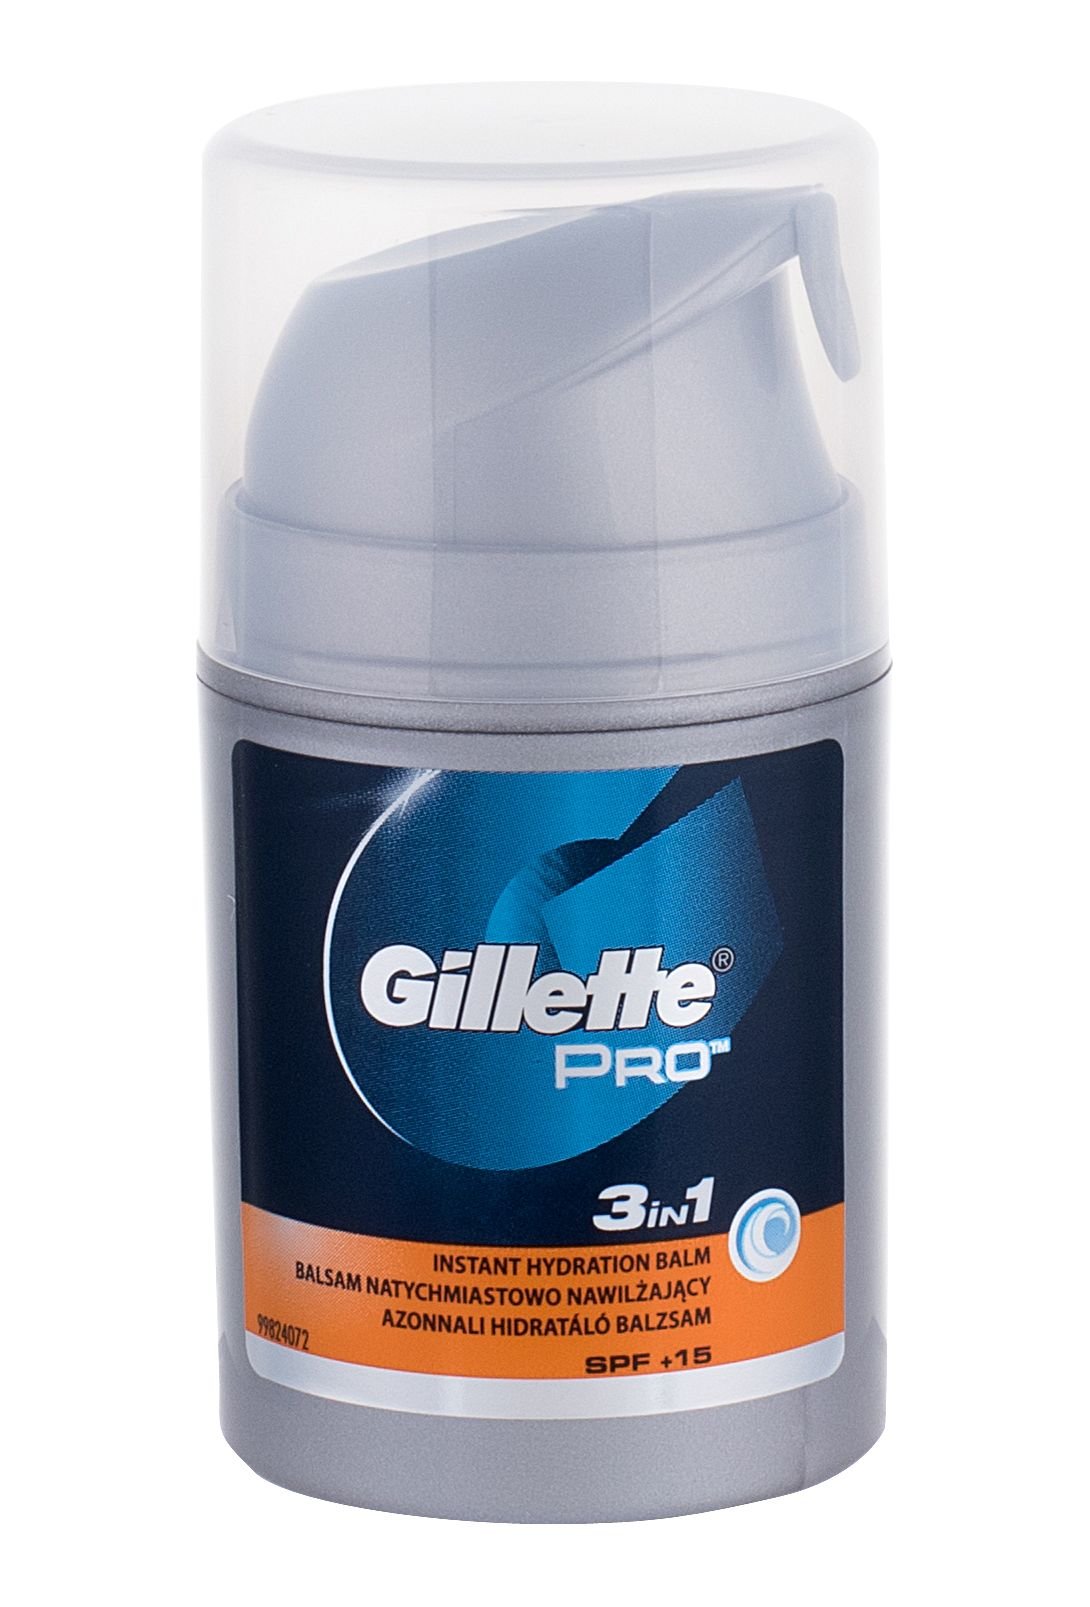 Gillette Pro 3in1 Instant Hydration Balm SPF15